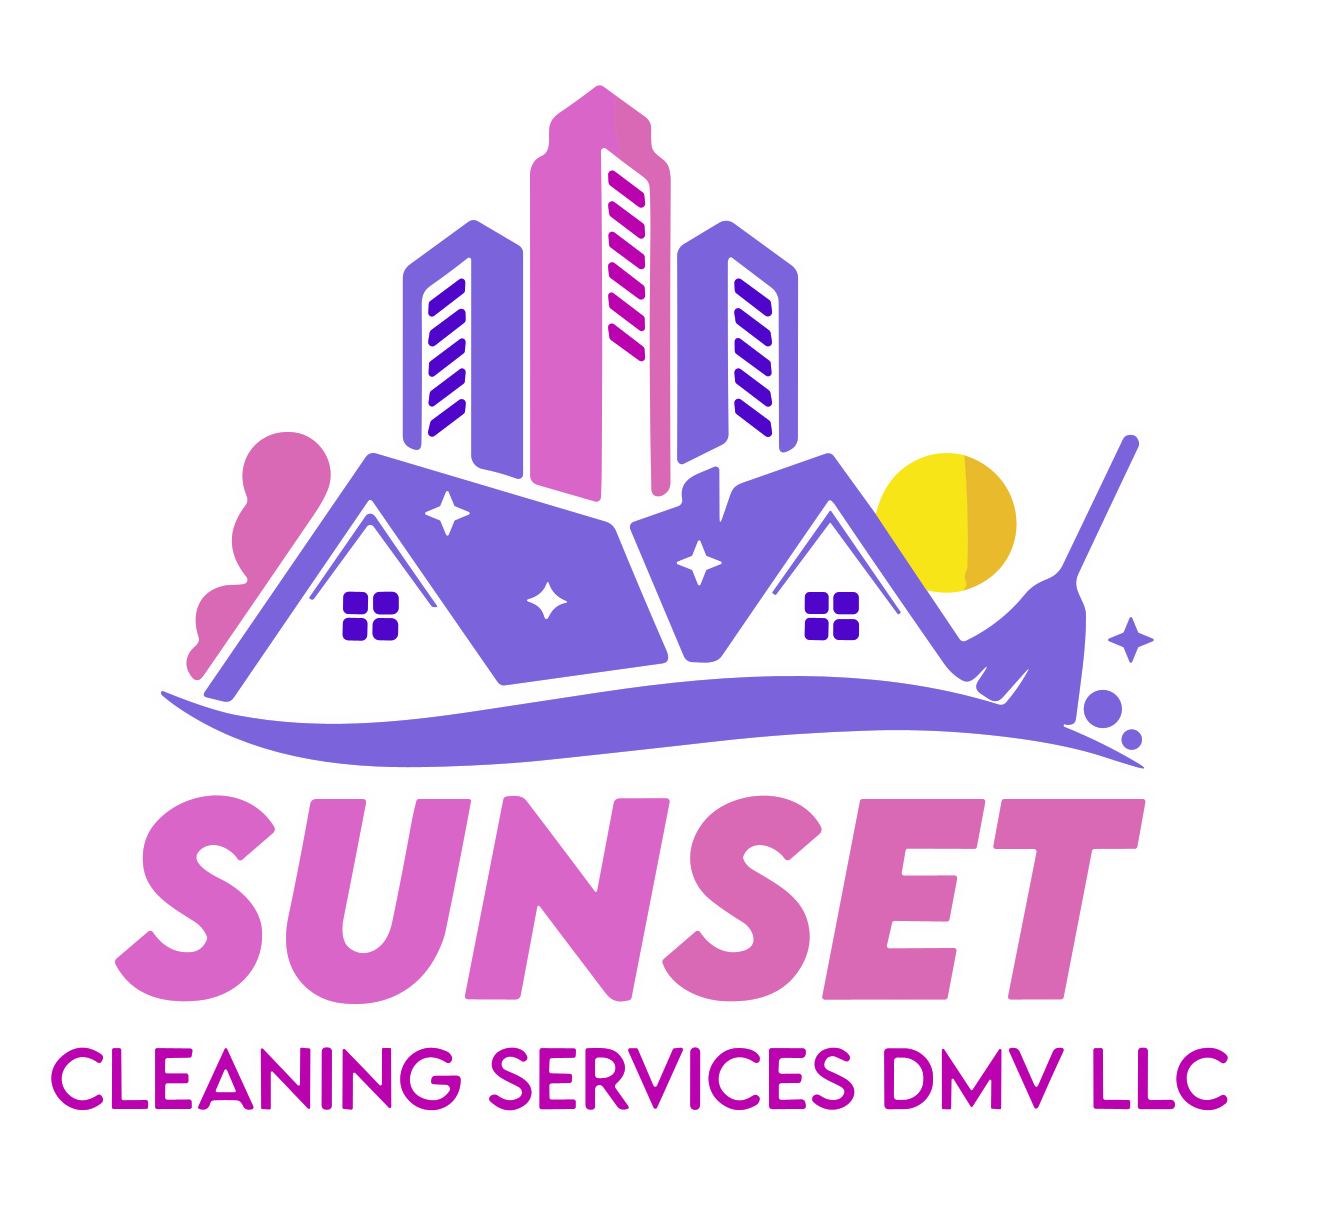 Sunset Cleaning Services DMV llc offers services of Residential Cleaning, Deep Cleaning, Move Out - In, Airbnb Cleaning, Commercial Cleaning in Baltimore city, Baltimore county, Harford county, Howard county, Anne arundel county, Annapolis - Residential Cleaning